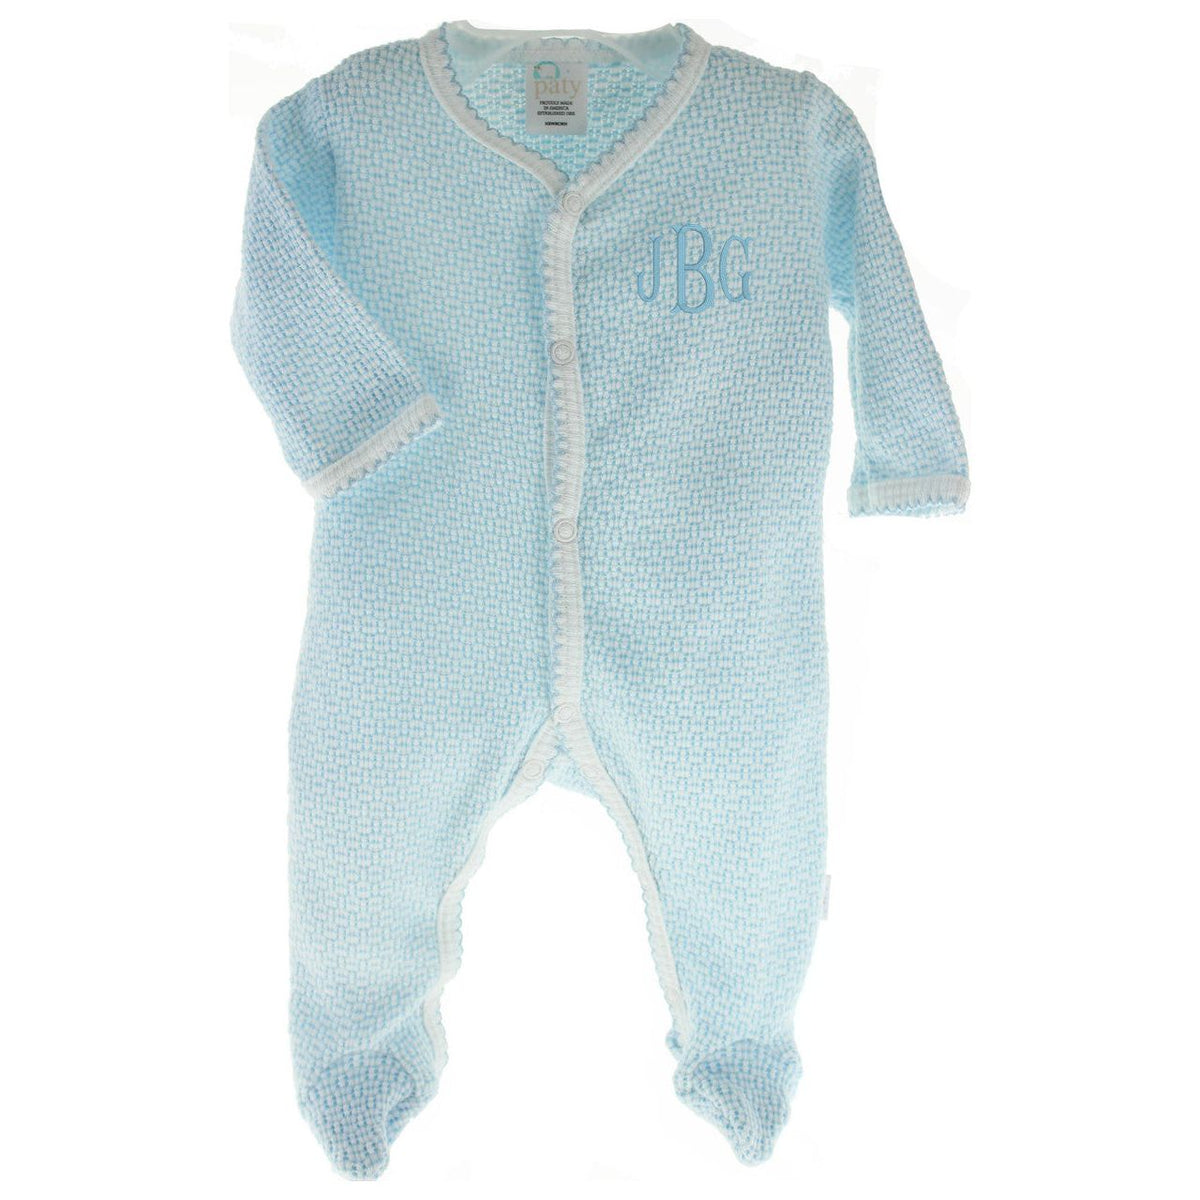 Paty Baby Boys Blue Footed Oneise Sleeper